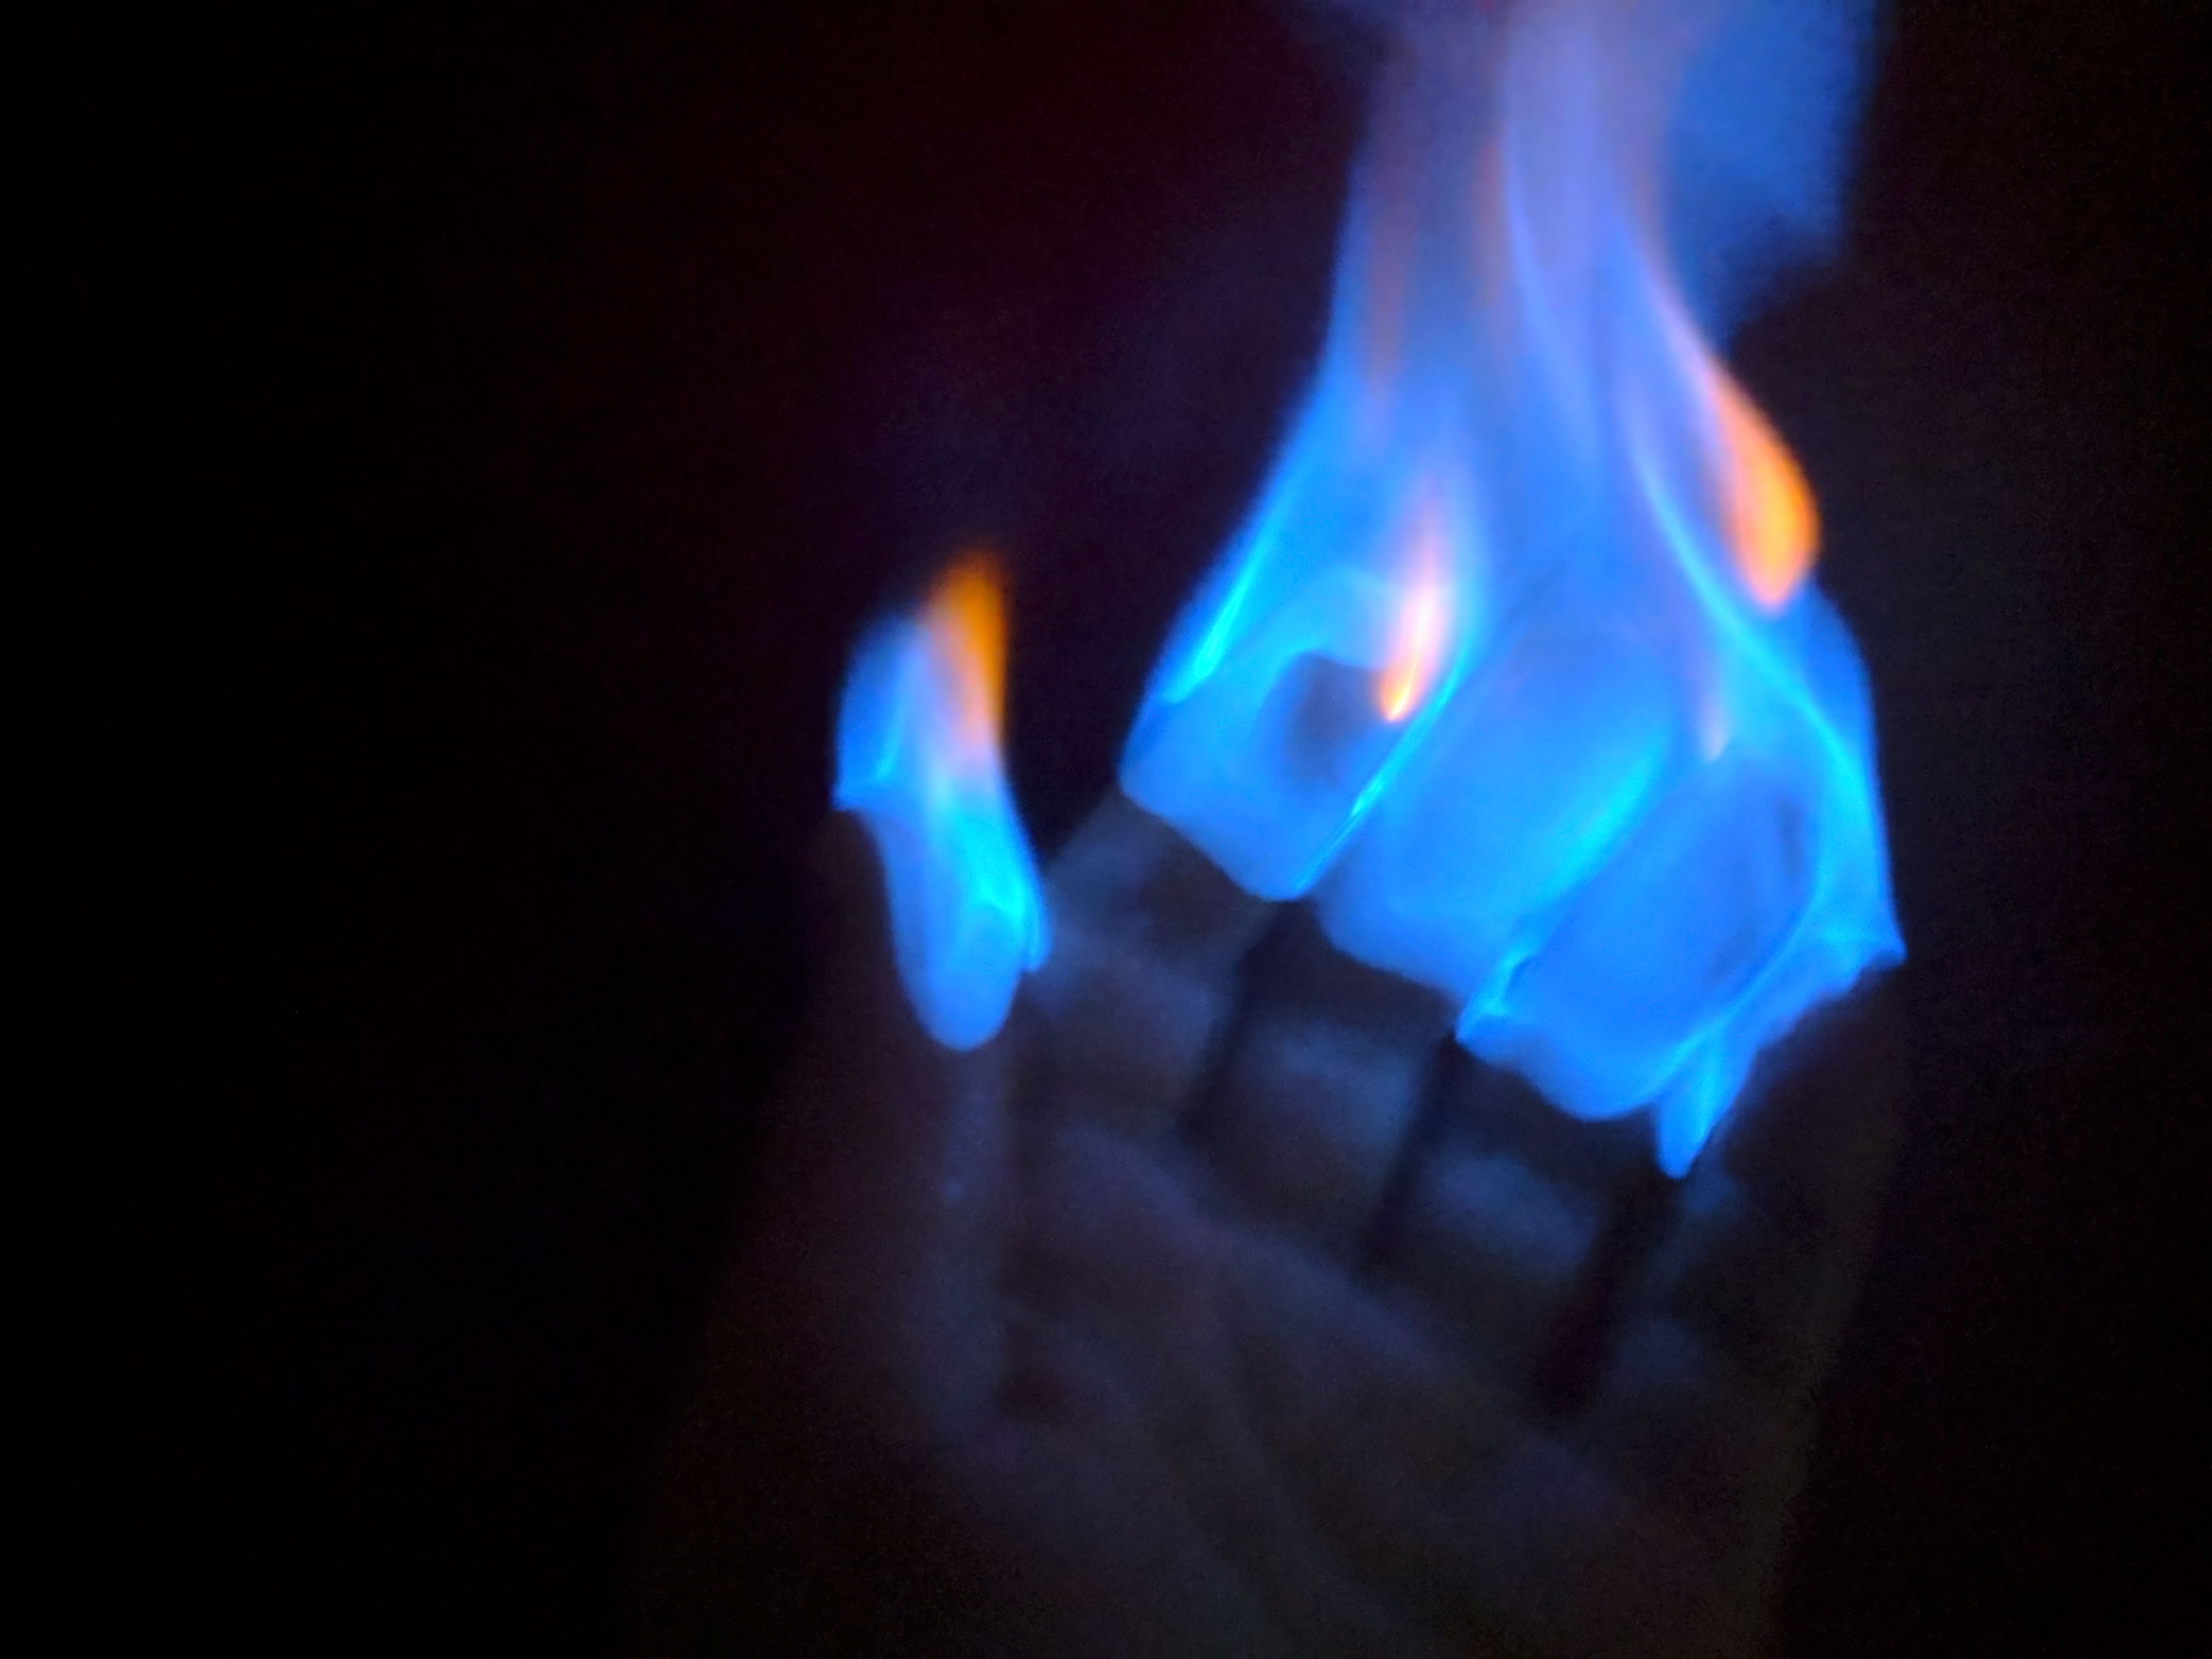 Hand Sanitizer Fire Project - Instructions